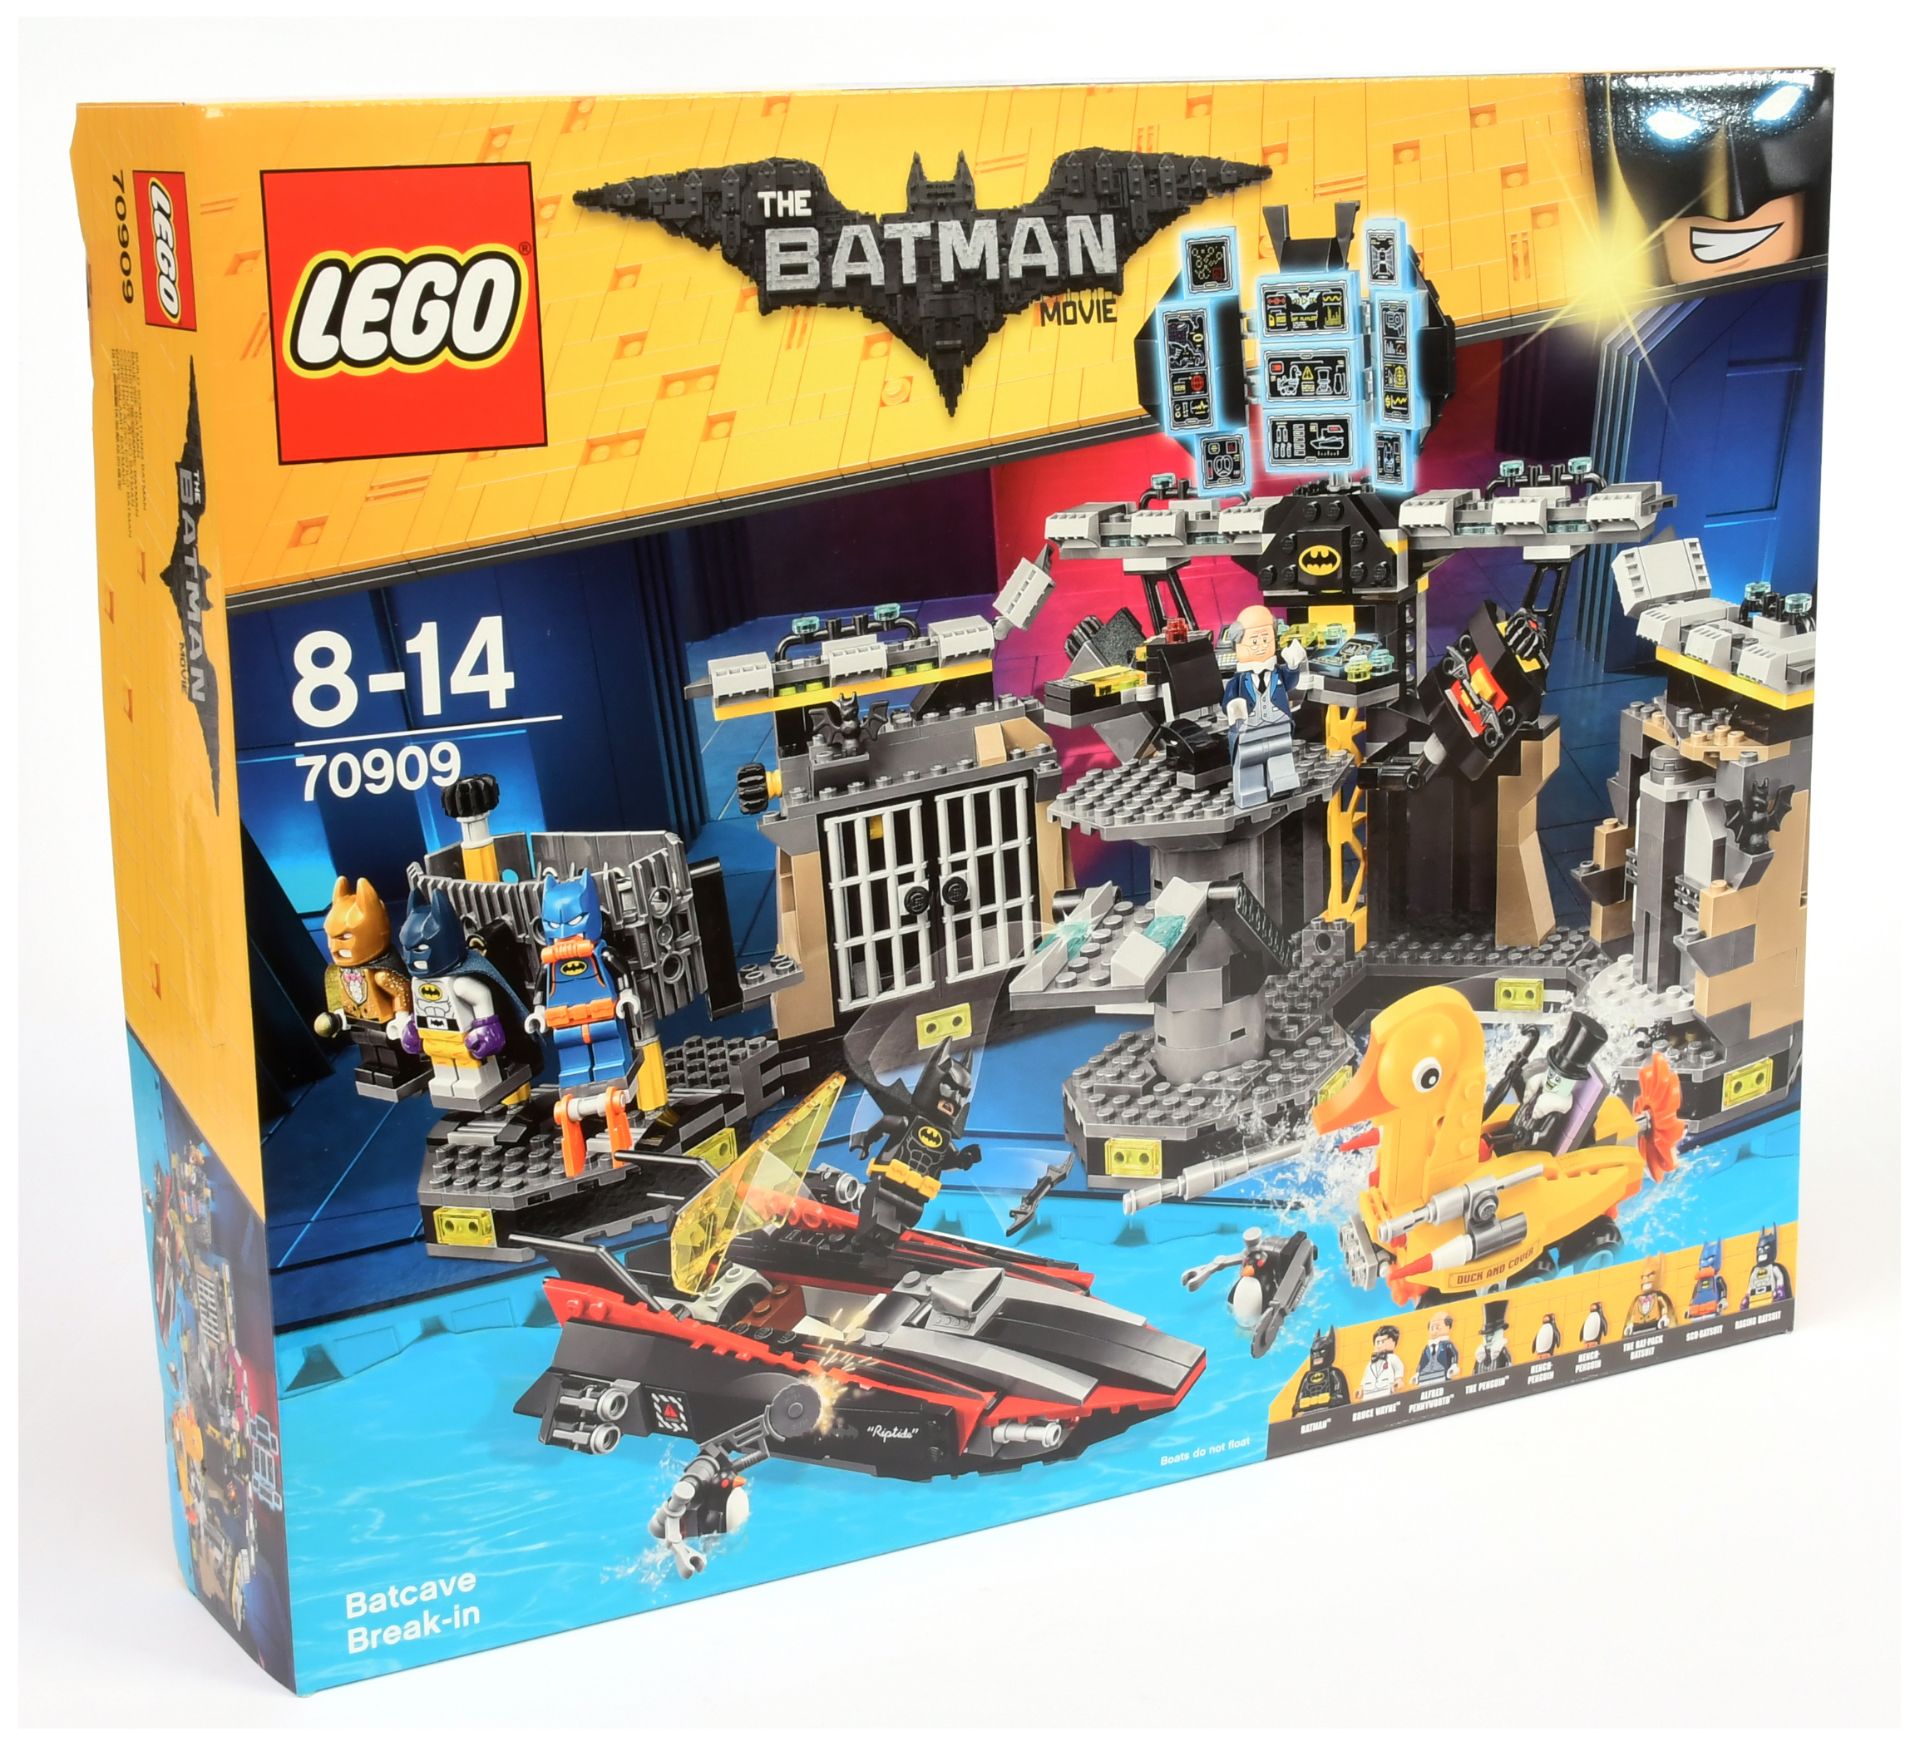 Lego The Batman Movie set number 70909 Batcave Break-in, within Near Mint sealed packaging. EX SH...